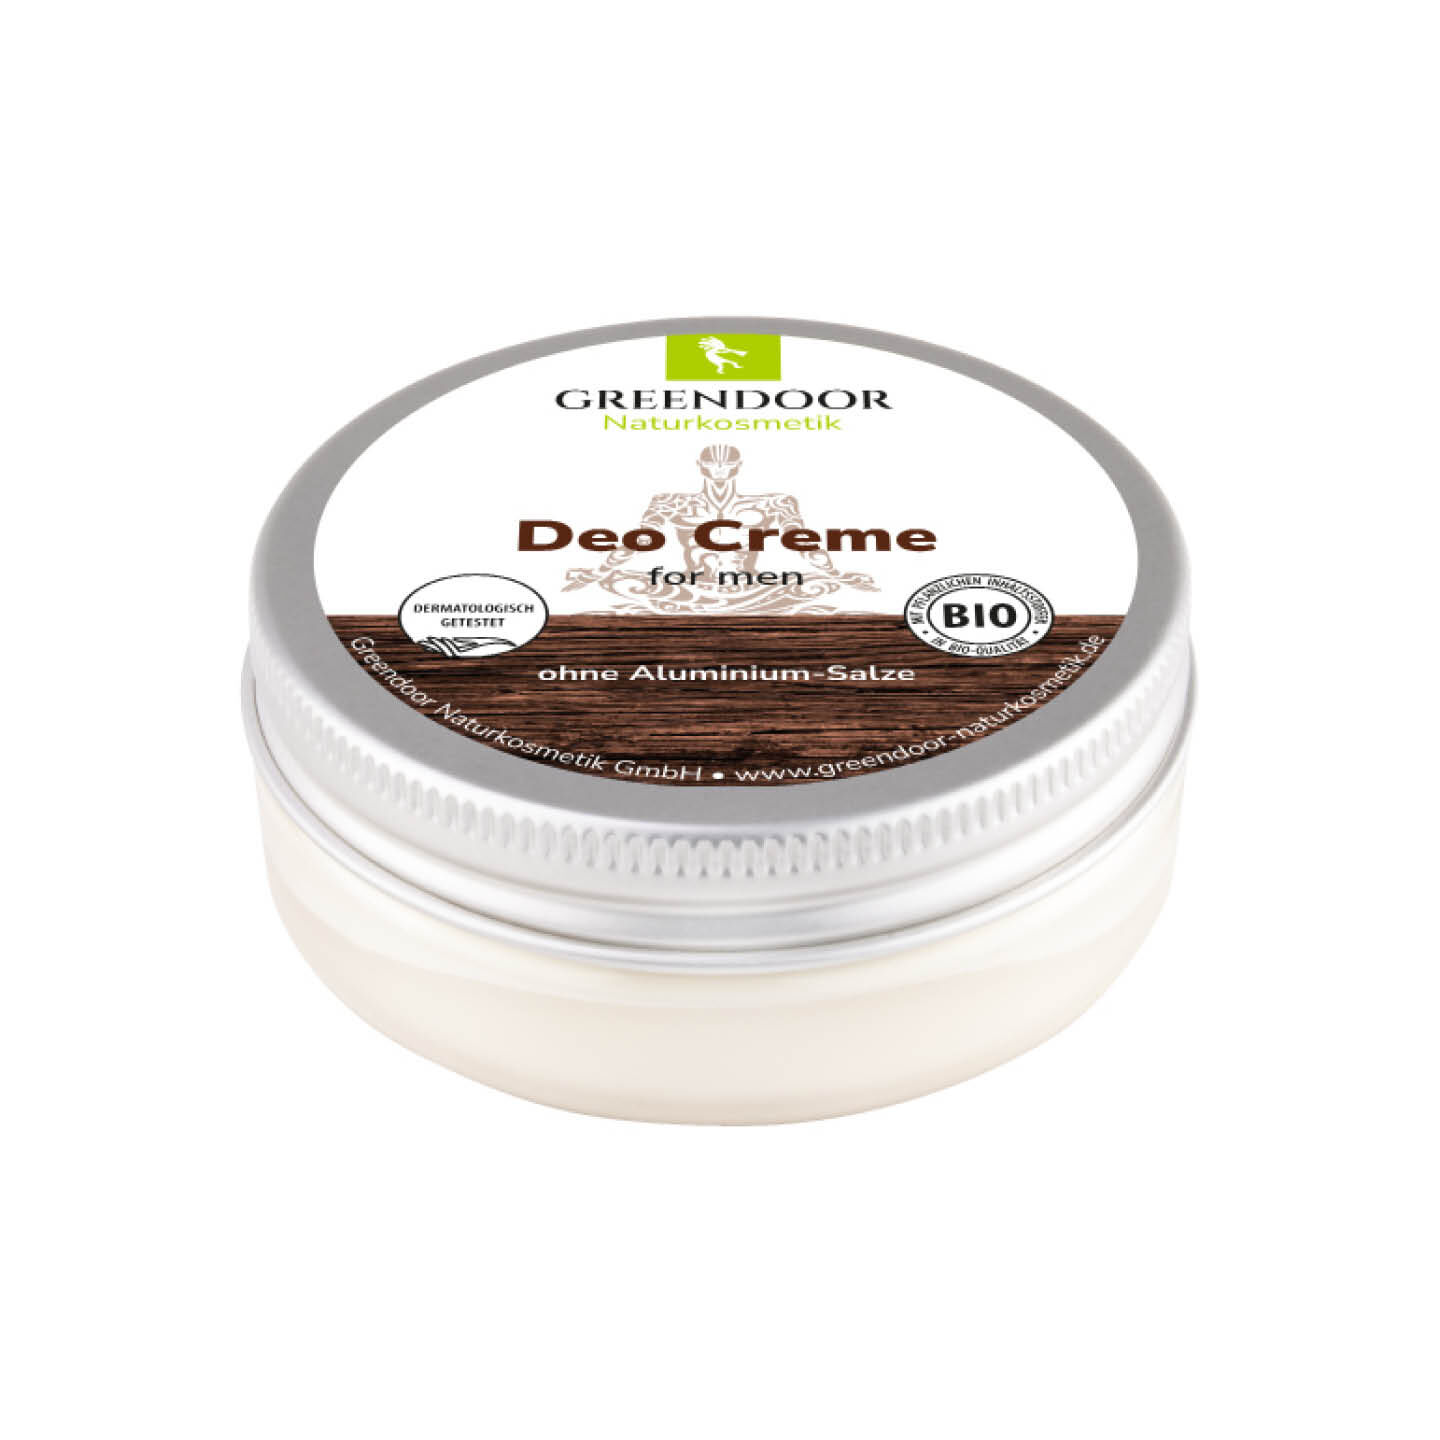 Deo Creme for men